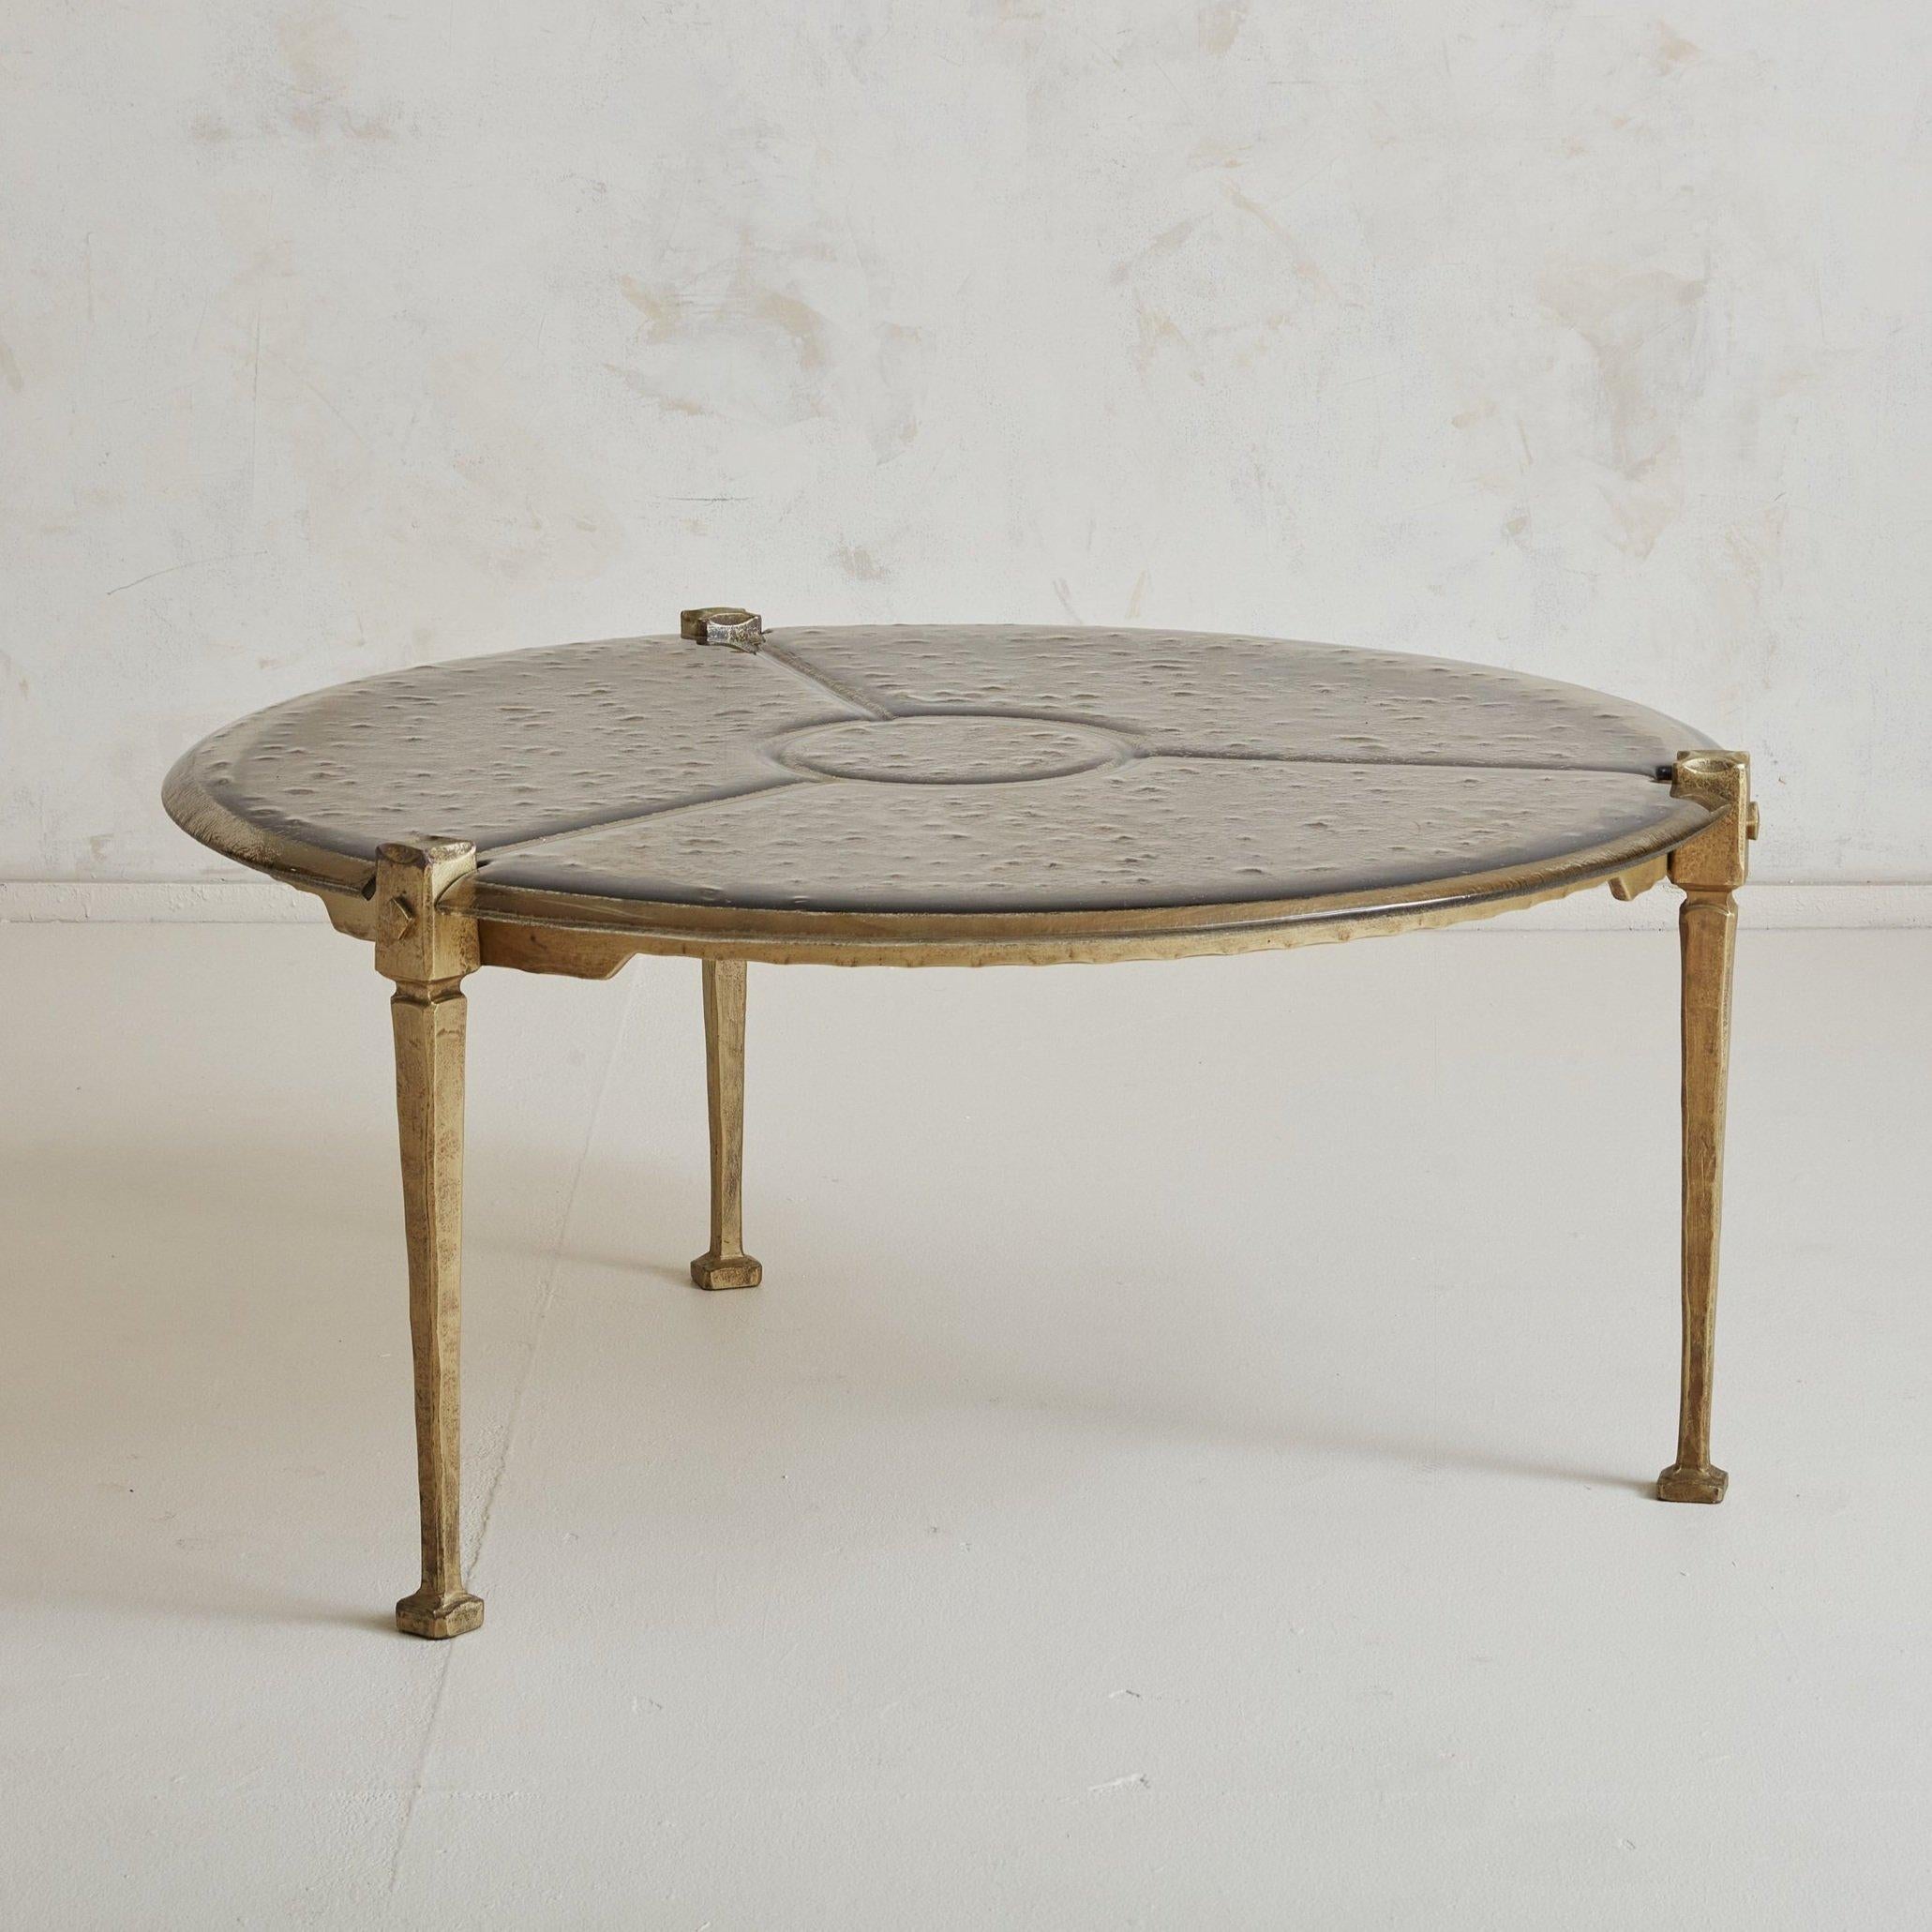 A rare brutalist bronze and glass top round coffee table by German designer Lothar Klute. This coffee table features a forged bronze frame with three tapered legs, textured bubble glass top, and square bronze feet. A gorgeous geometric design in